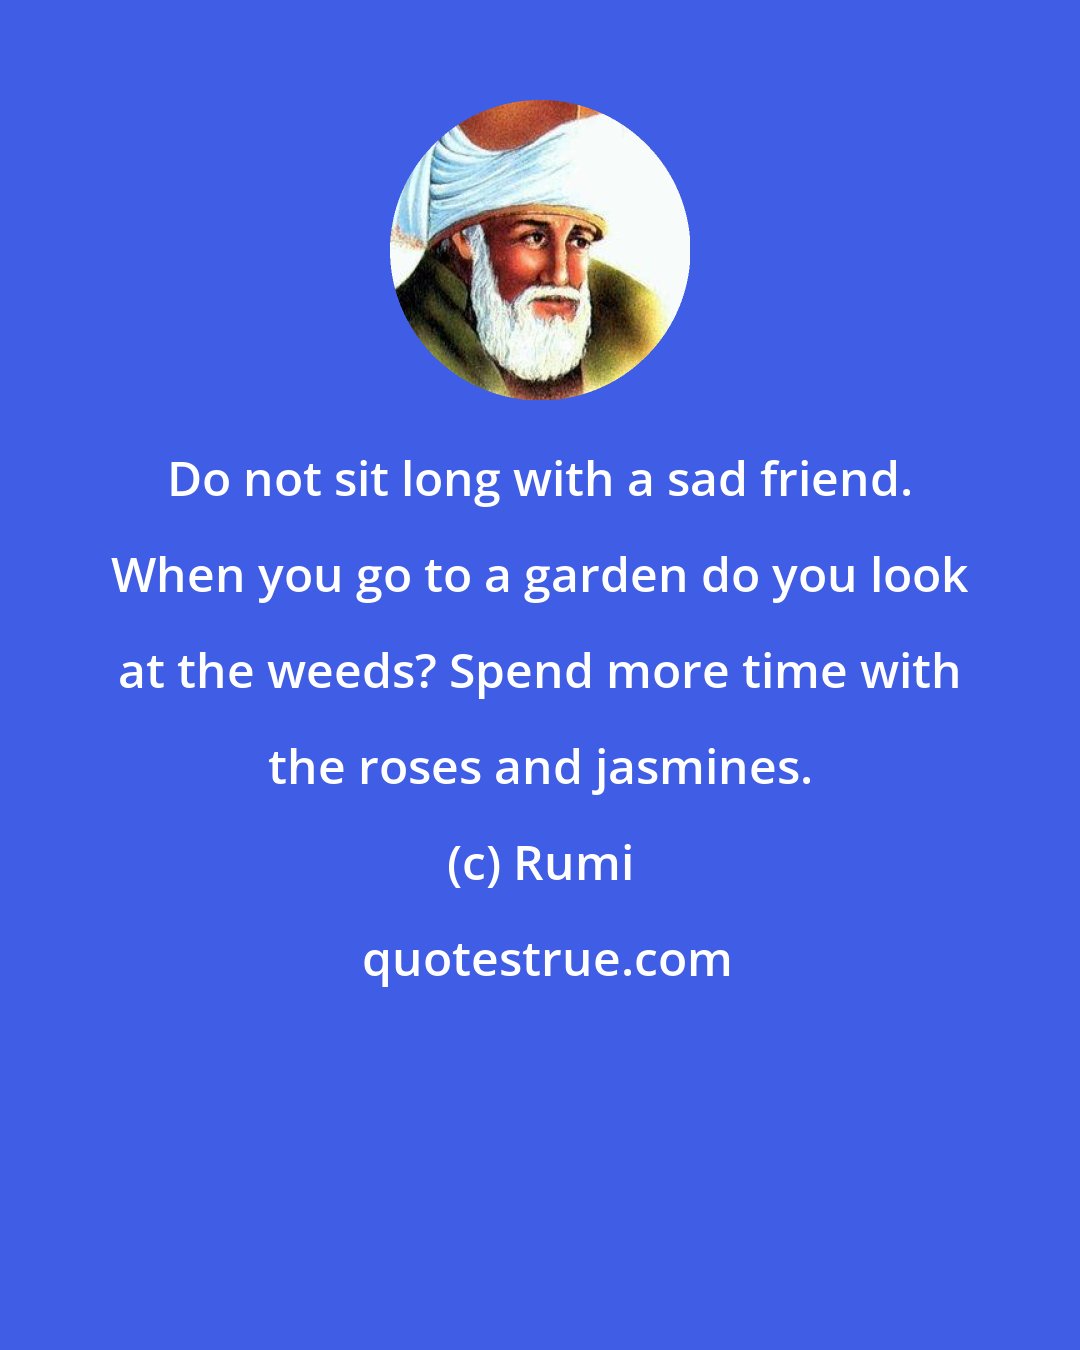 Rumi: Do not sit long with a sad friend. When you go to a garden do you look at the weeds? Spend more time with the roses and jasmines.